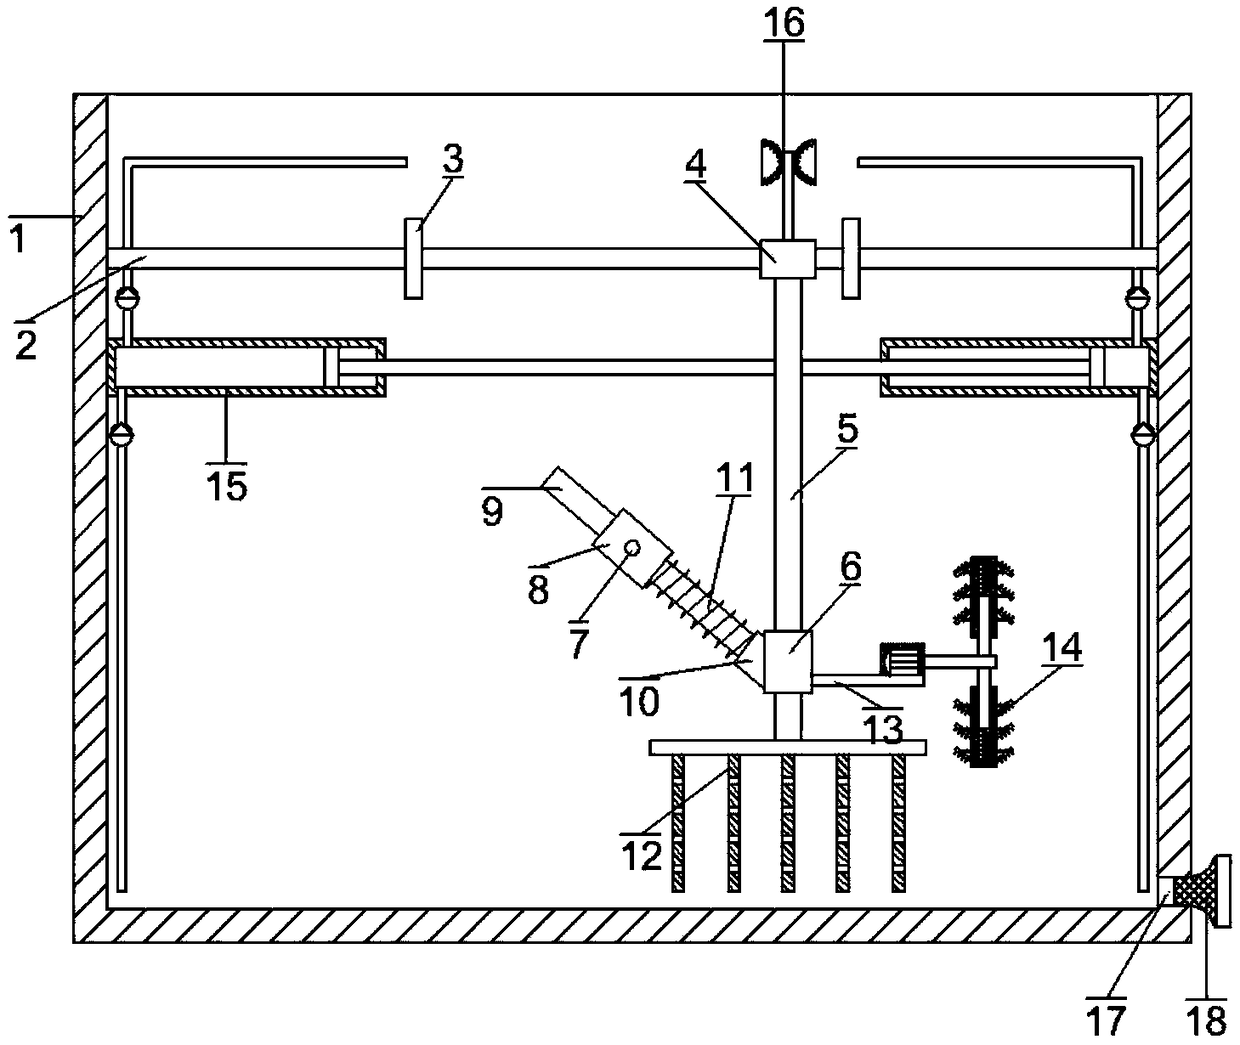 Industrial liquid material mixing equipment based on rectangular mobile mixing trajectory